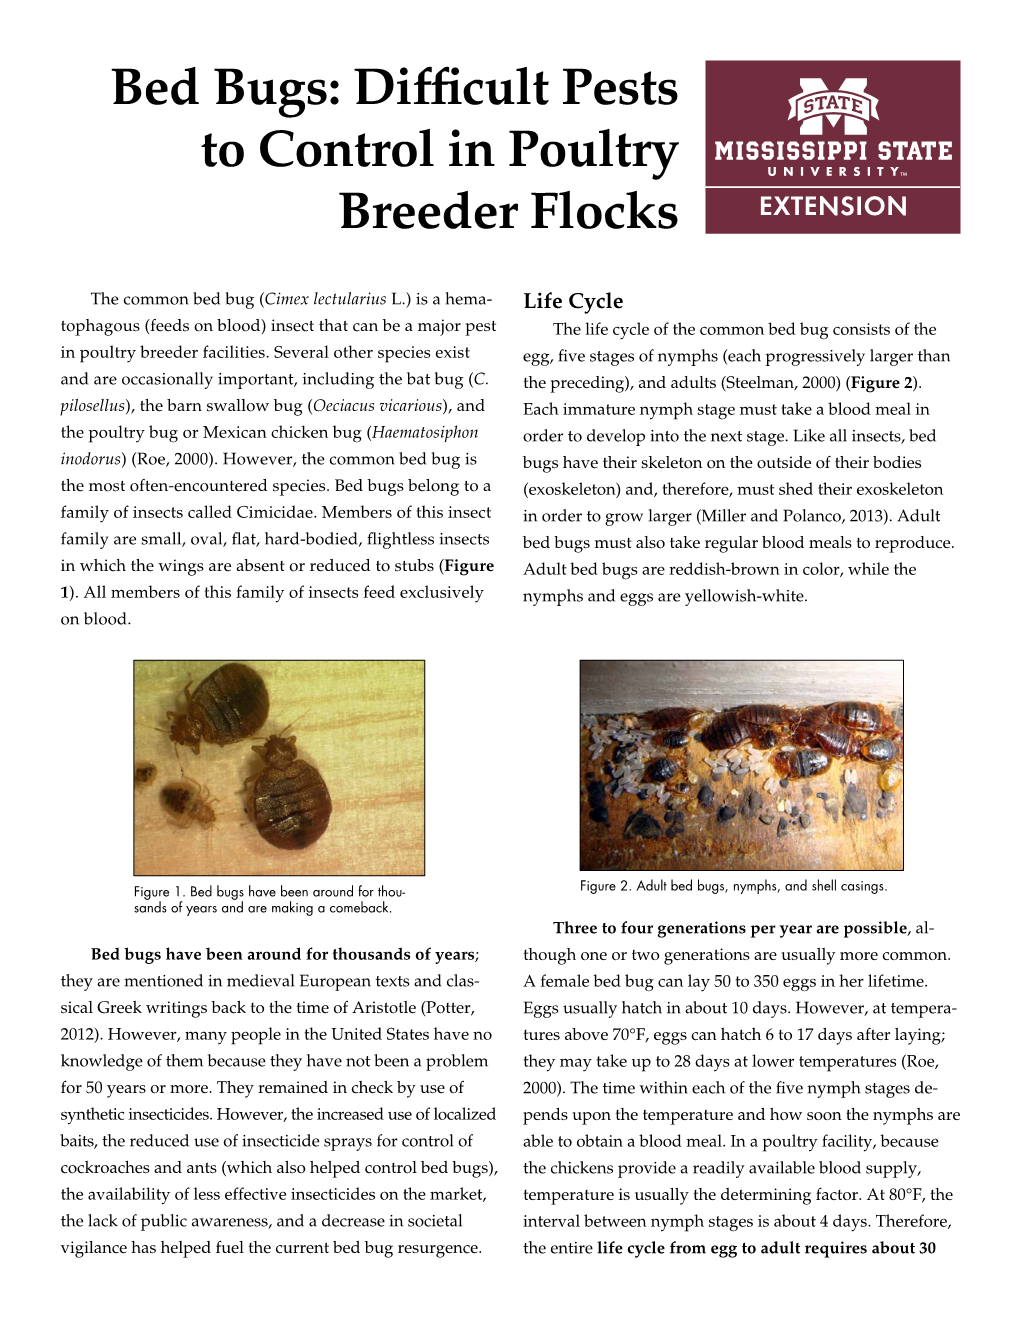 Bed Bugs: Difficult Pests to Control in Poultry Breeder Flocks